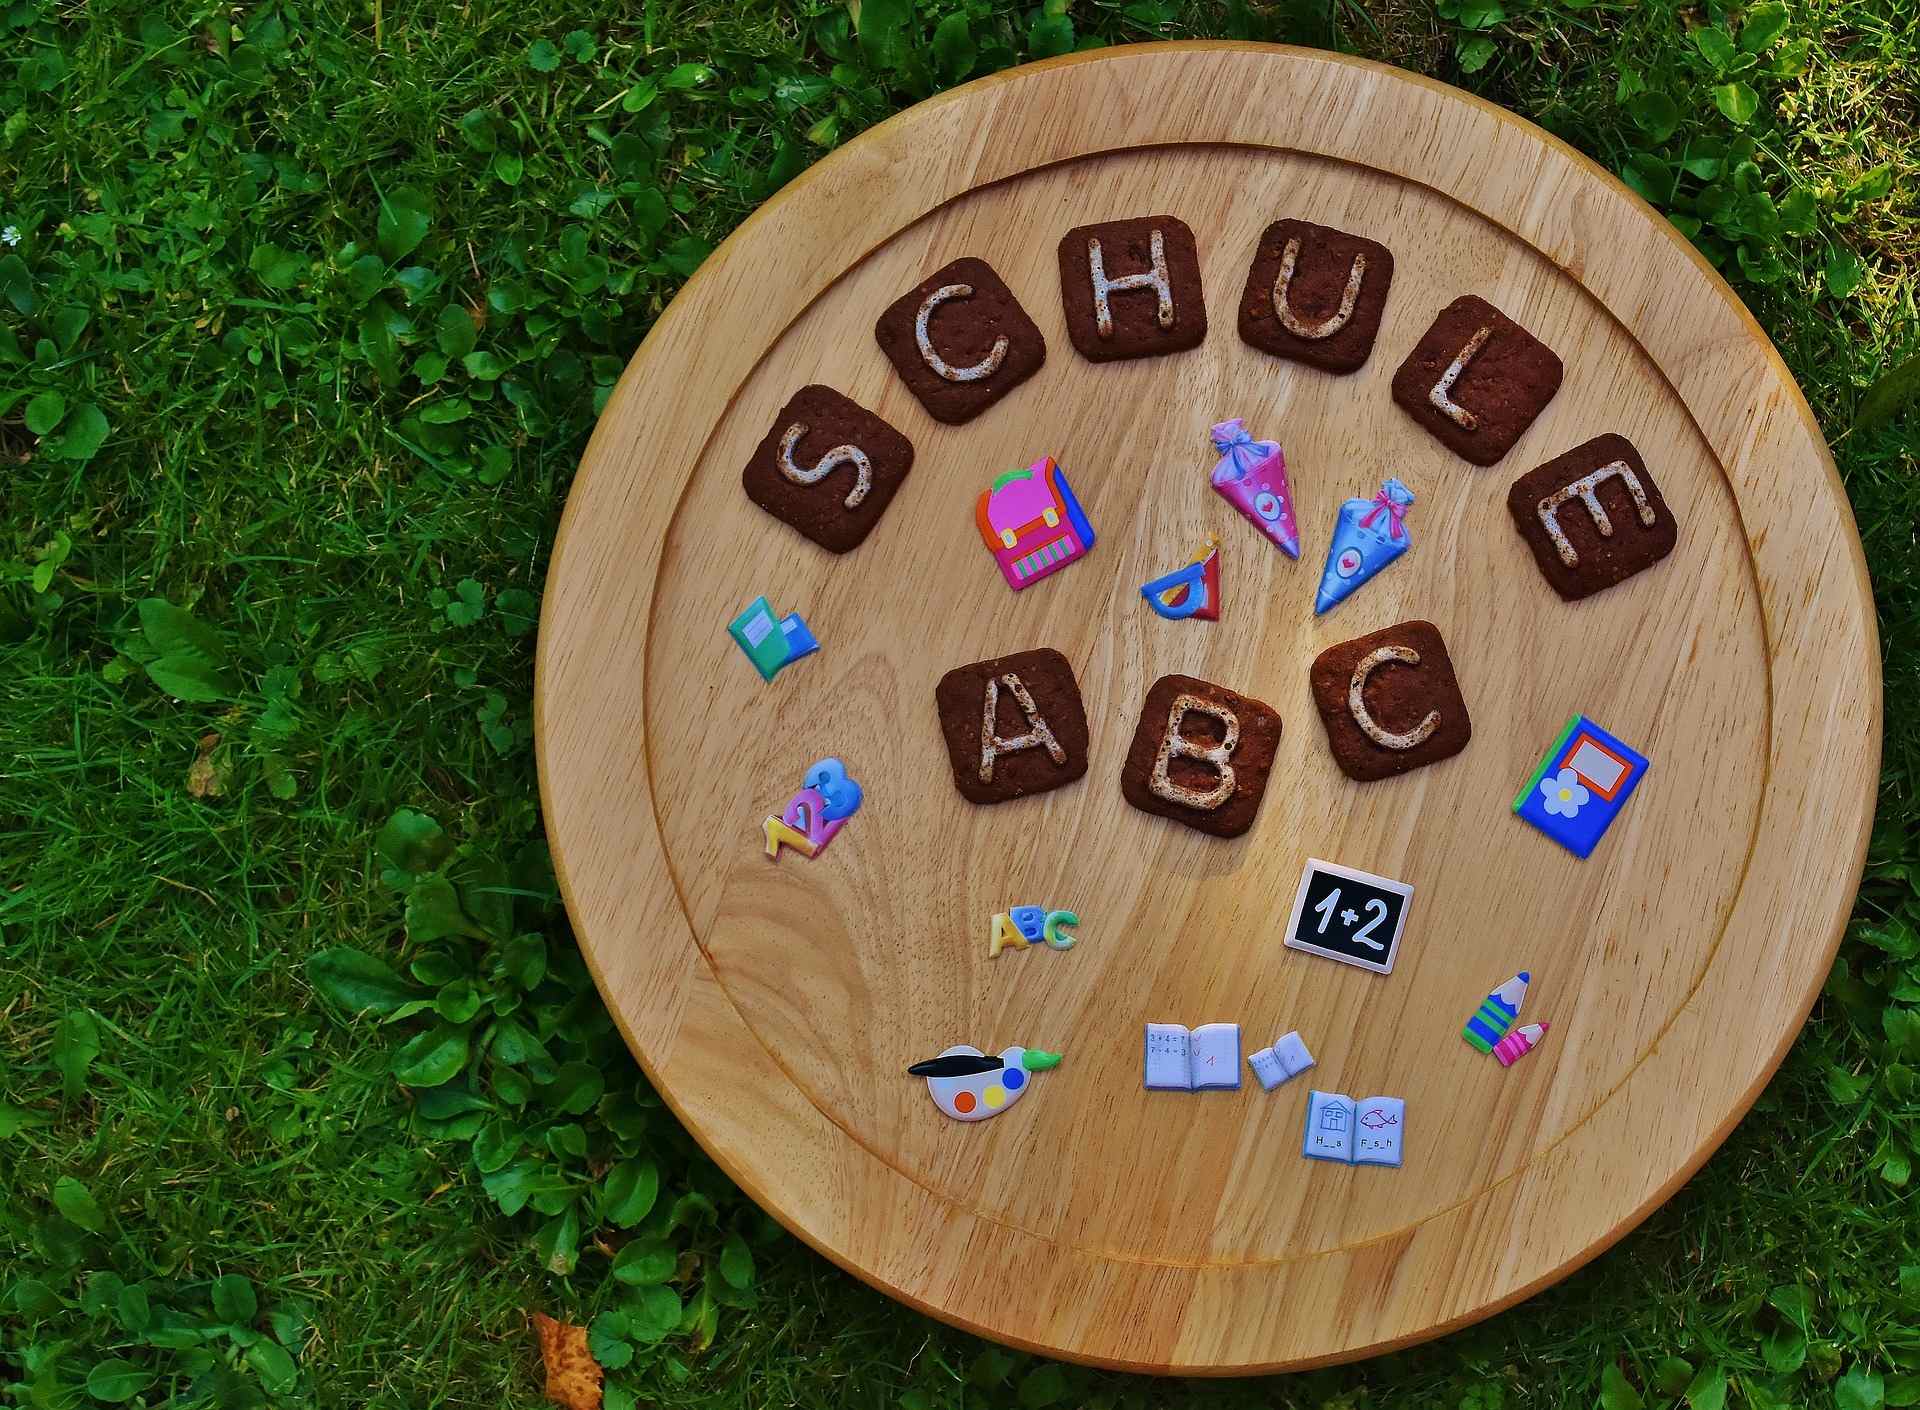 Wooden circle with letters and symbols showing "School - ABC"